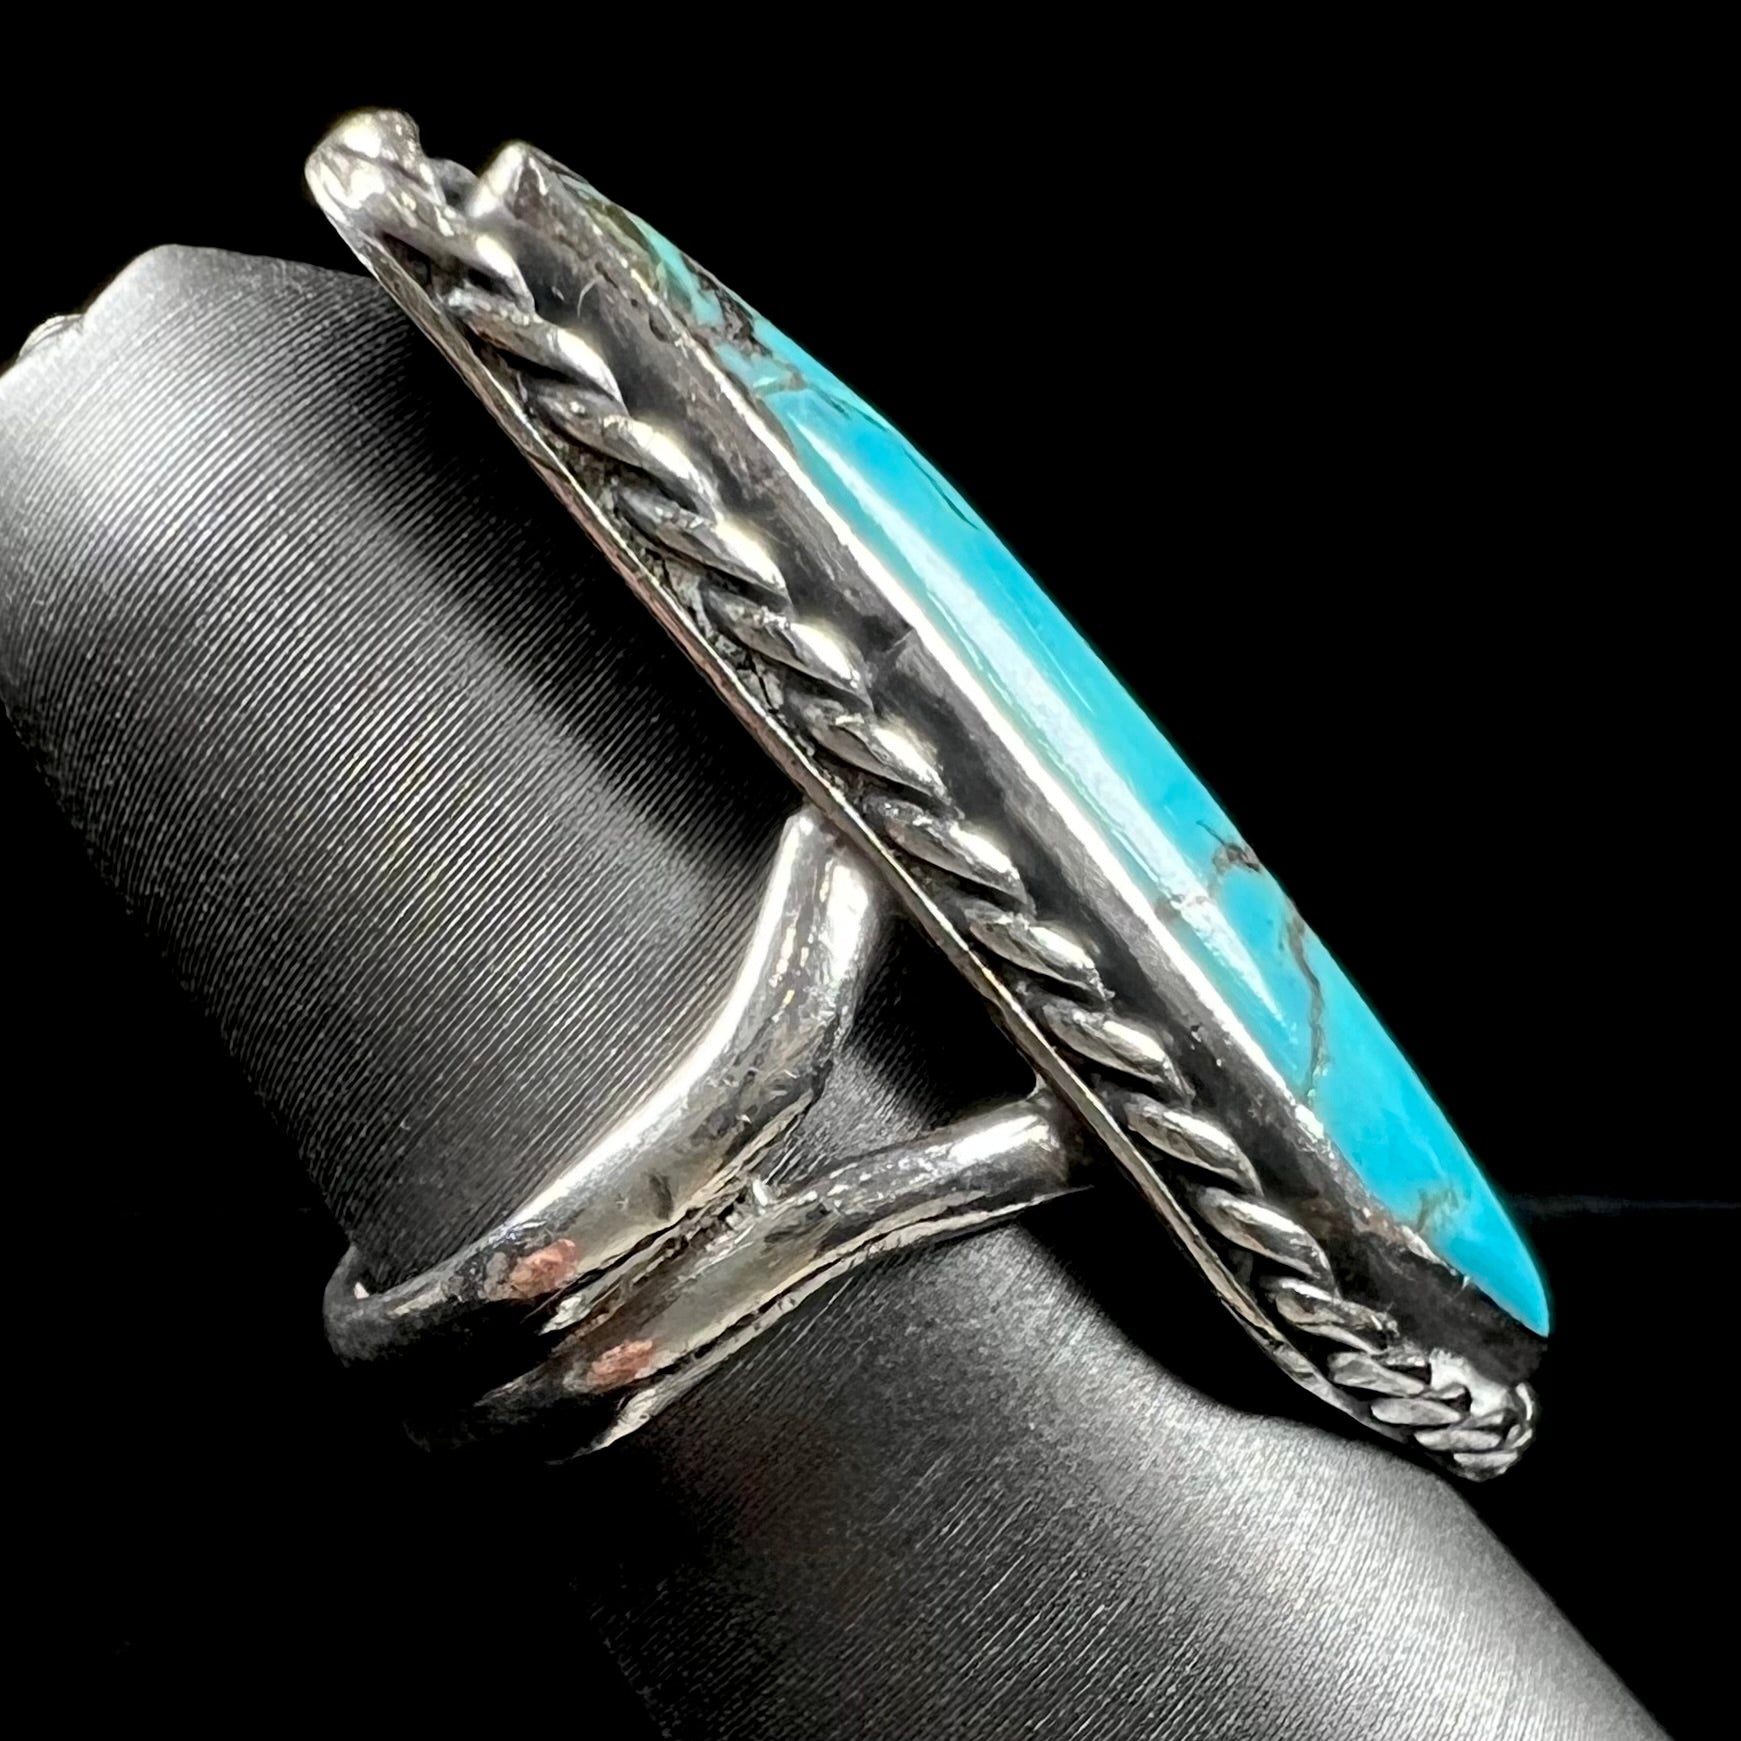 A vintage, Southwest style sterling silver ring set with a natural turquoise stone.  The stone is blue with a black matrix.